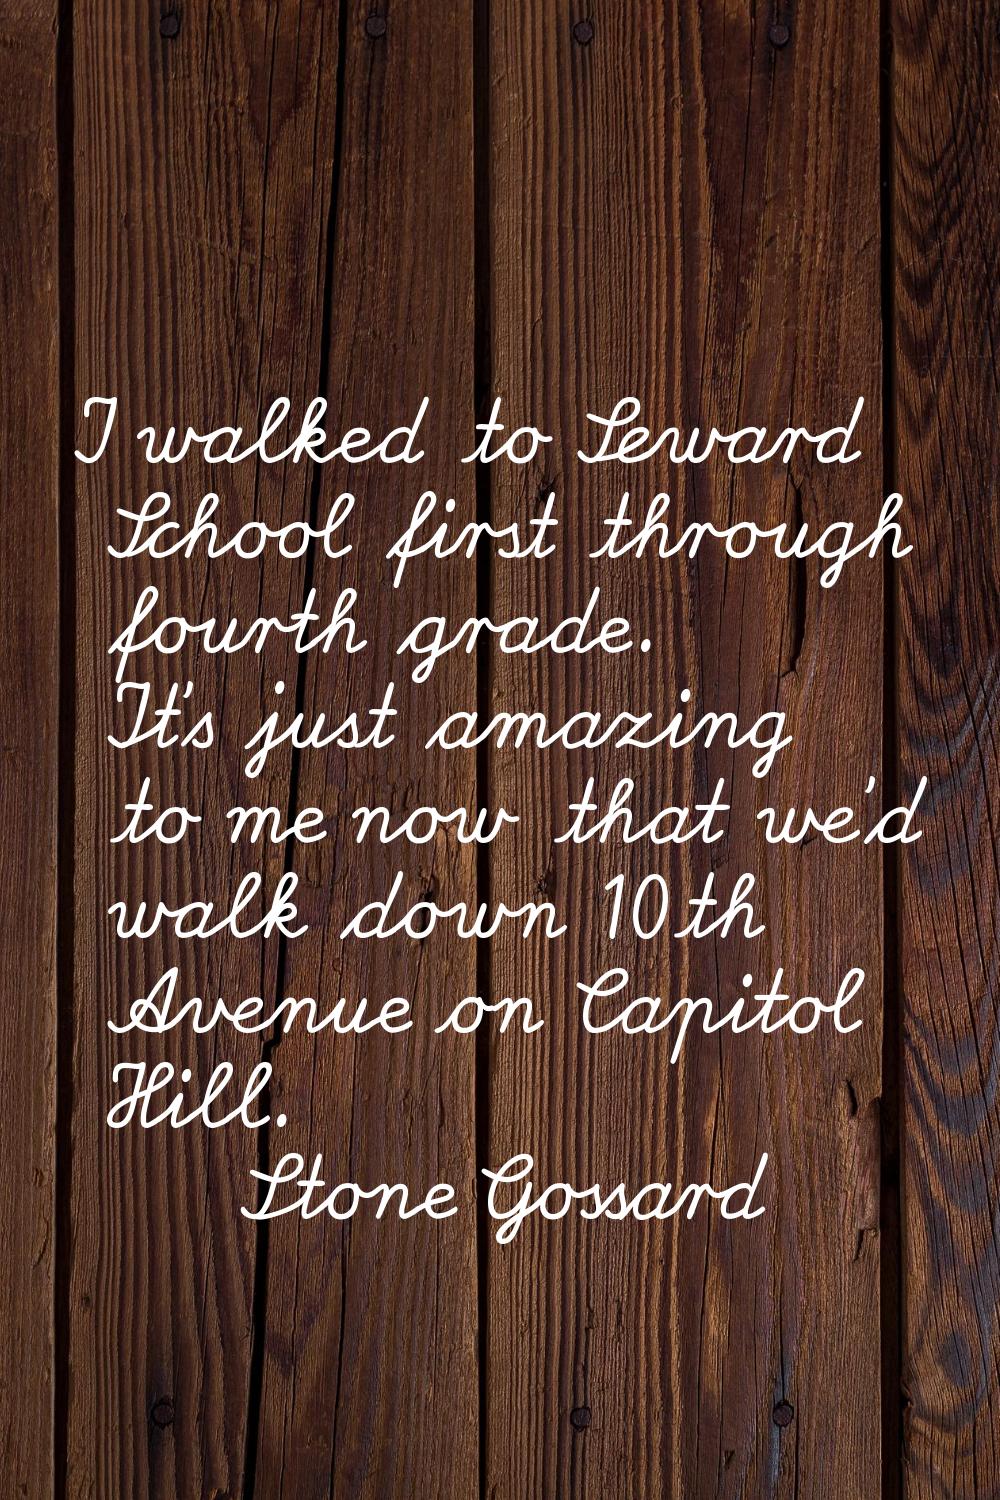 I walked to Seward School first through fourth grade. It's just amazing to me now that we'd walk do